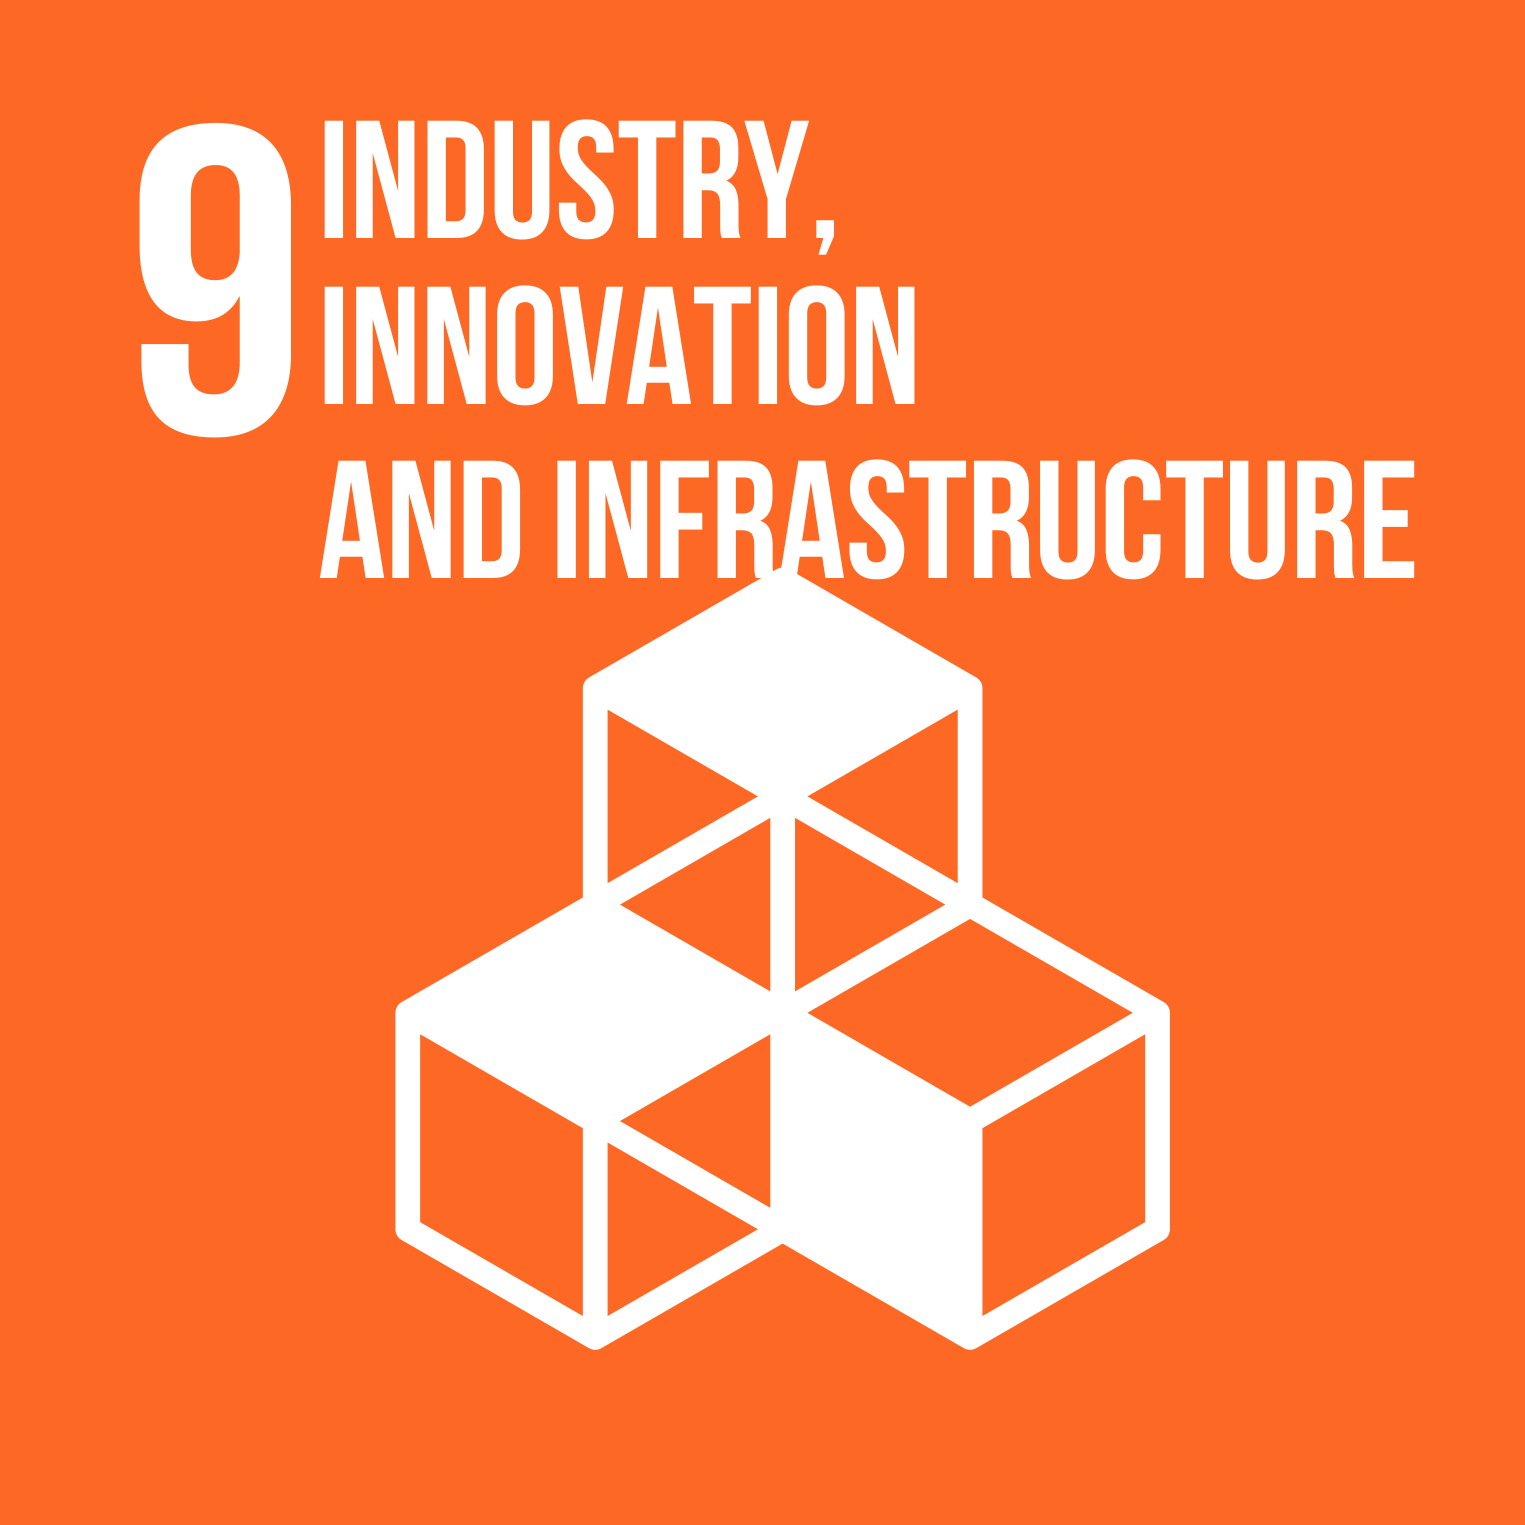 【SDG 9】Industry, Innovation and Infrastructure